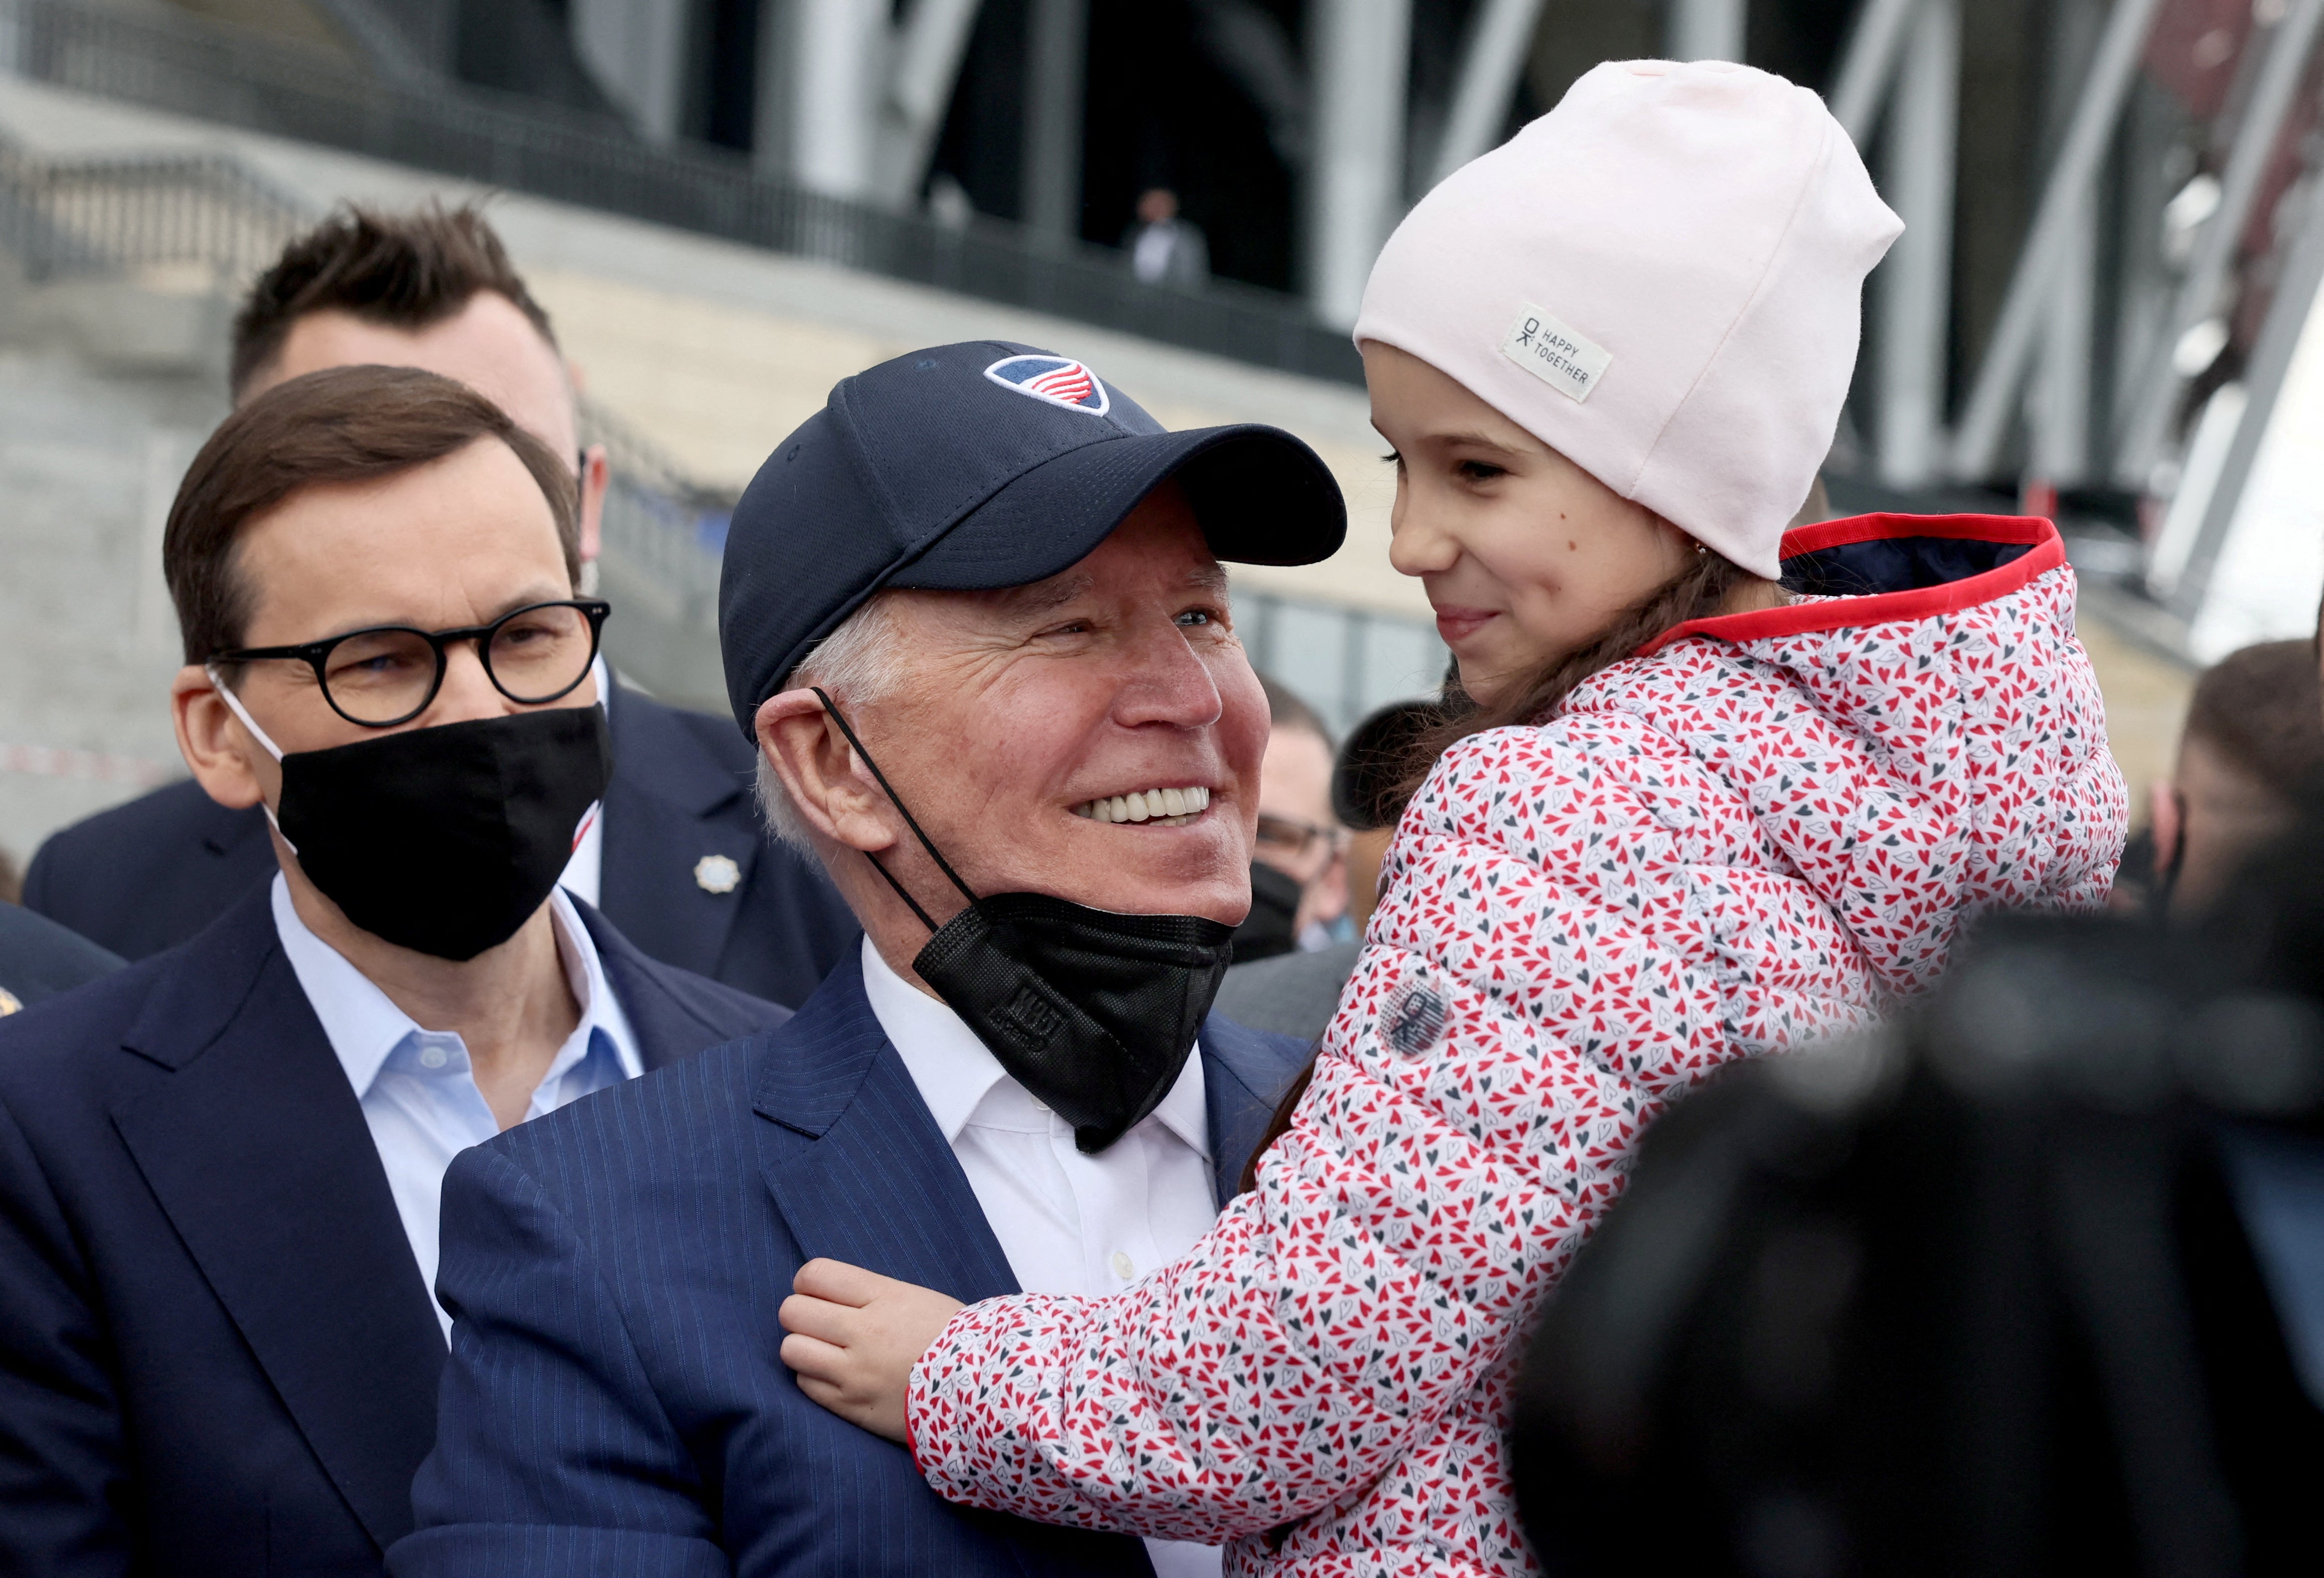 US president Joe Biden, flanked by Polish prime minister Mateusz Morawiecki, holds a child as he visits Ukrainian refugees at the PGE National Stadium in Warsaw, Poland